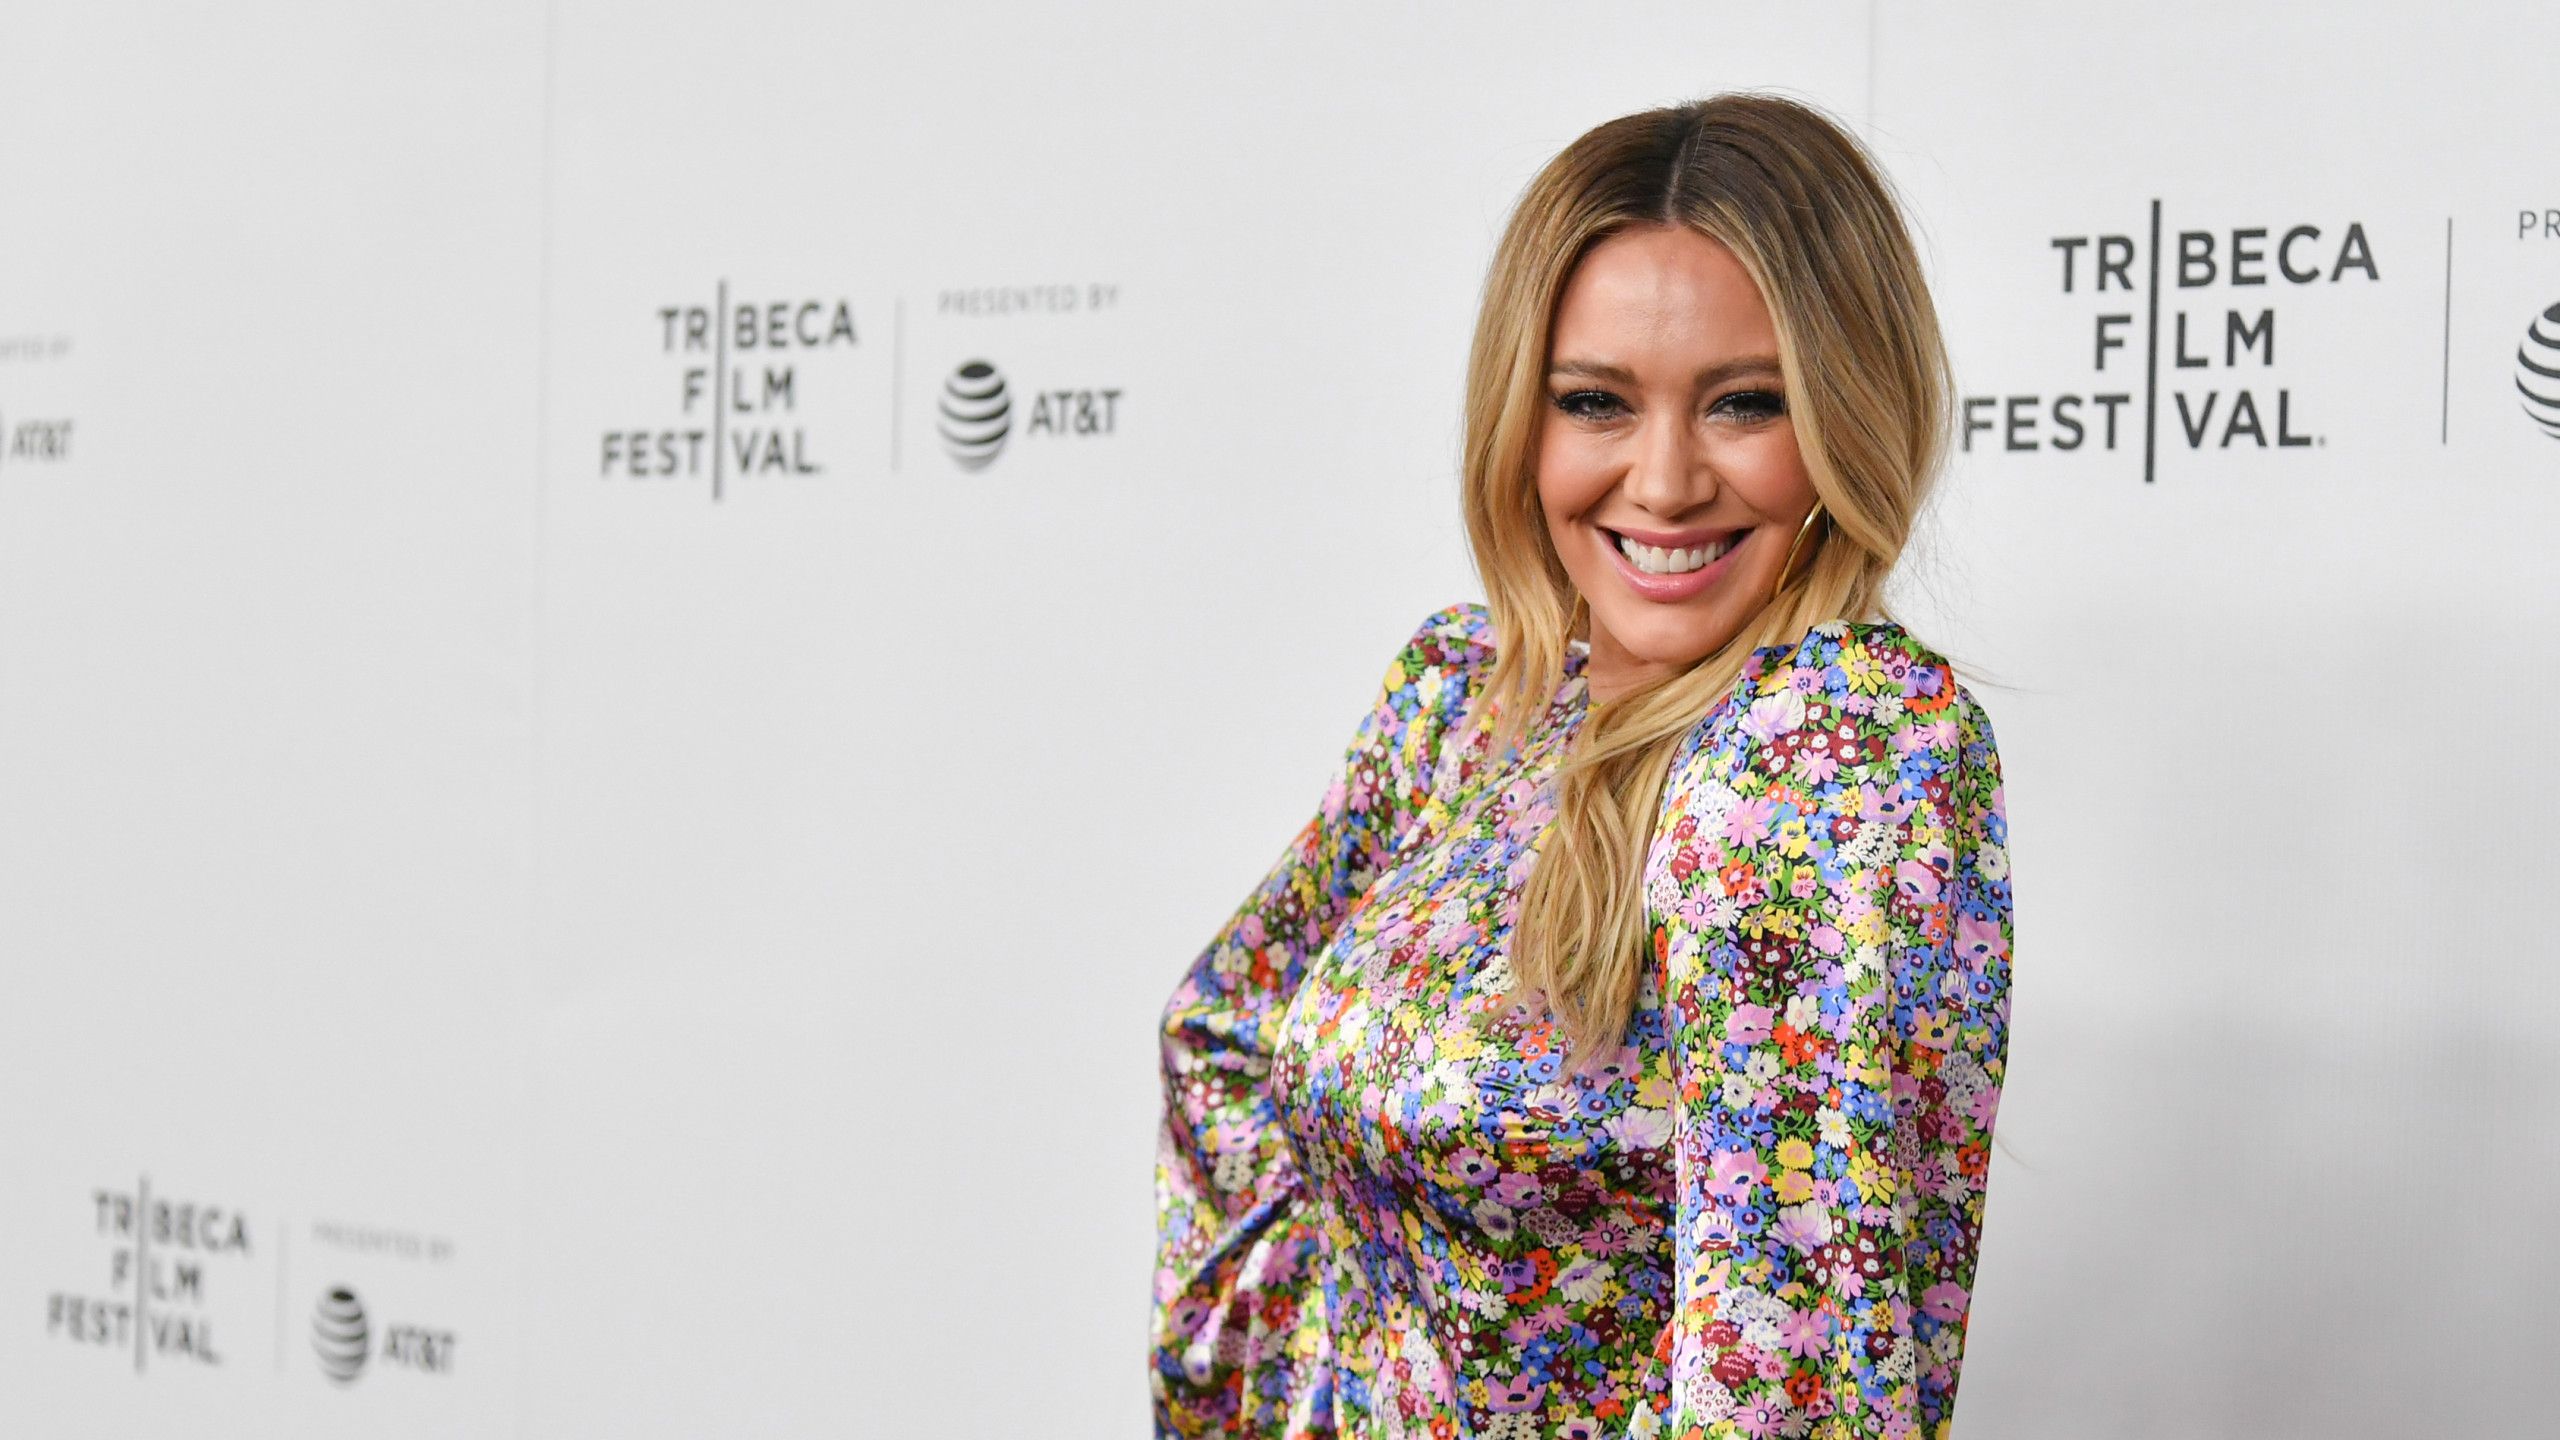 Lizzie McGuire' reboot starring Hilary Duff coming to Disney+